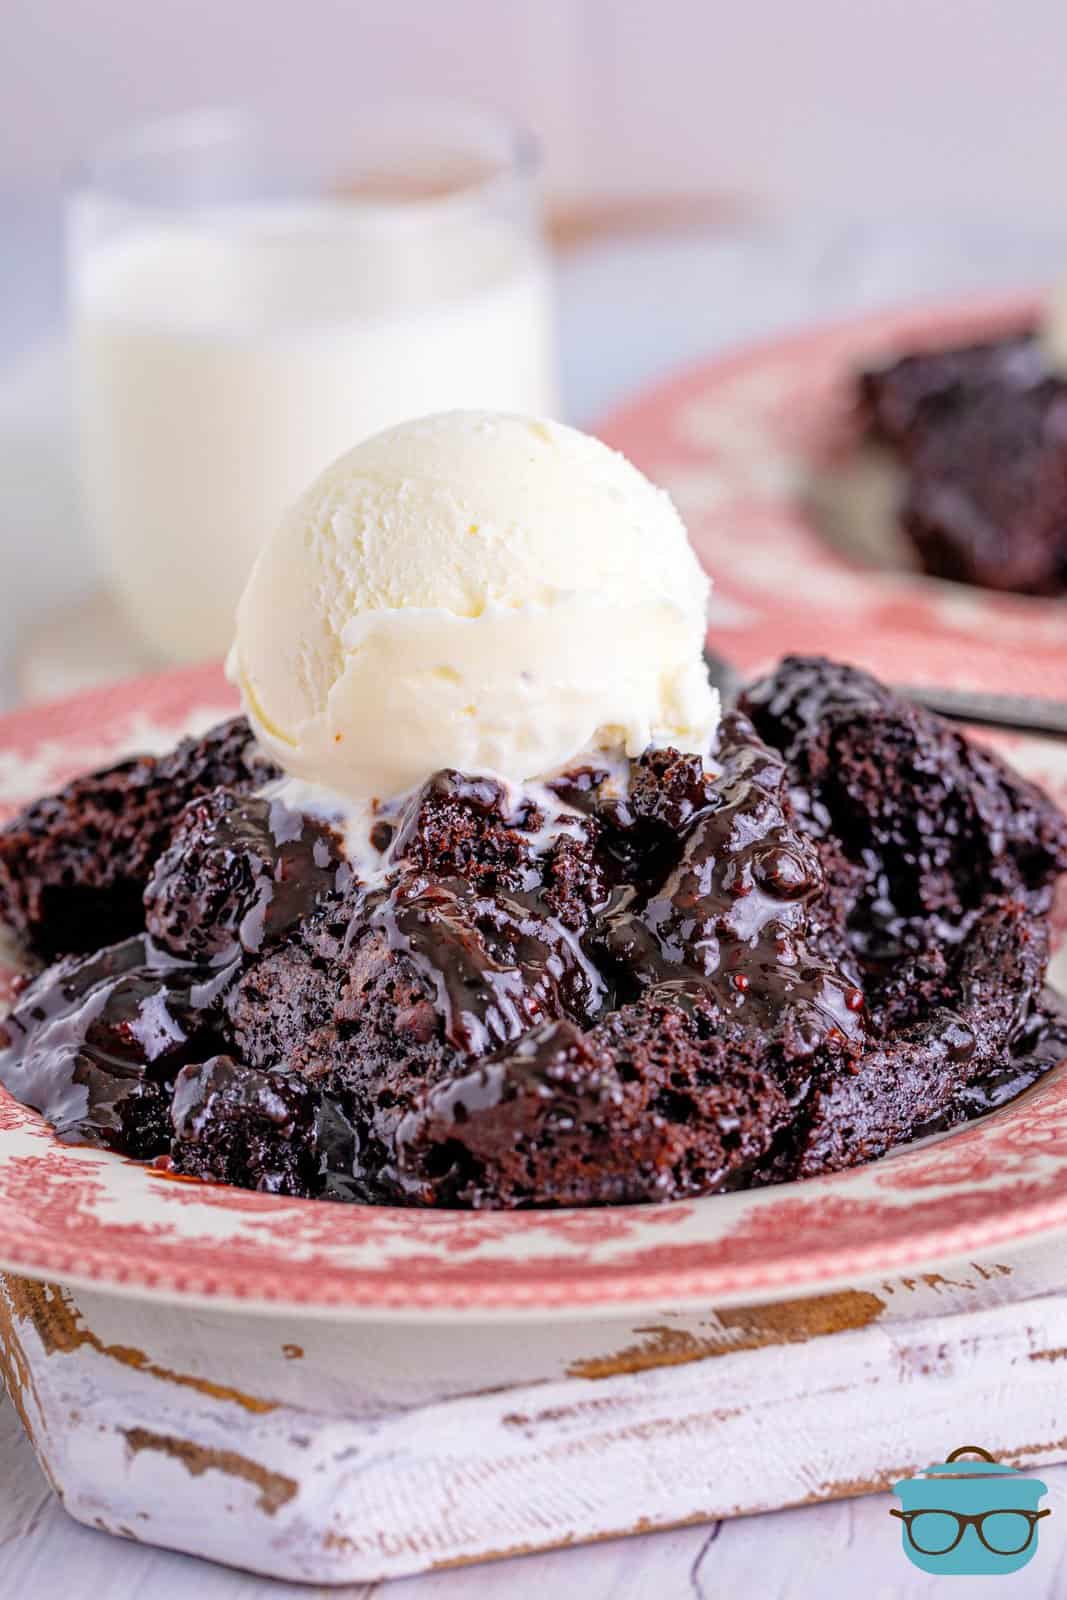 Hot Fudge Chocolate Cake on pink plate topped with ice cream.